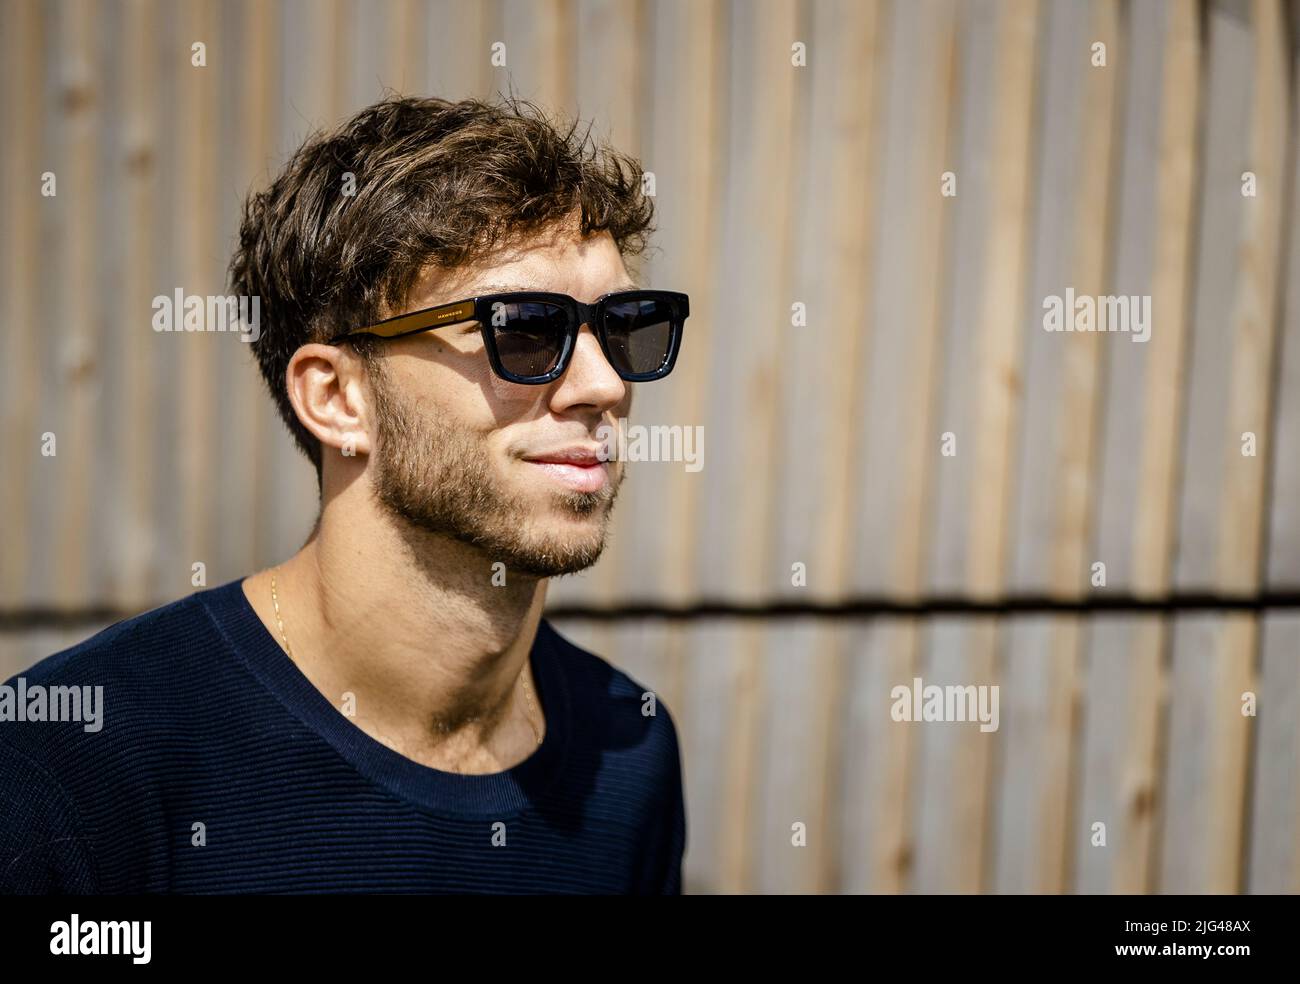 Austria, 2022-07-07 10:06:15 SPIELBERG - Pierre Gasly (AlphaTauri) arrives  at the Red Bull Ring race track ahead of the Austrian Grand Prix. ANP SEM  VAN DER WAL netherlands out - belgium out Stock Photo - Alamy